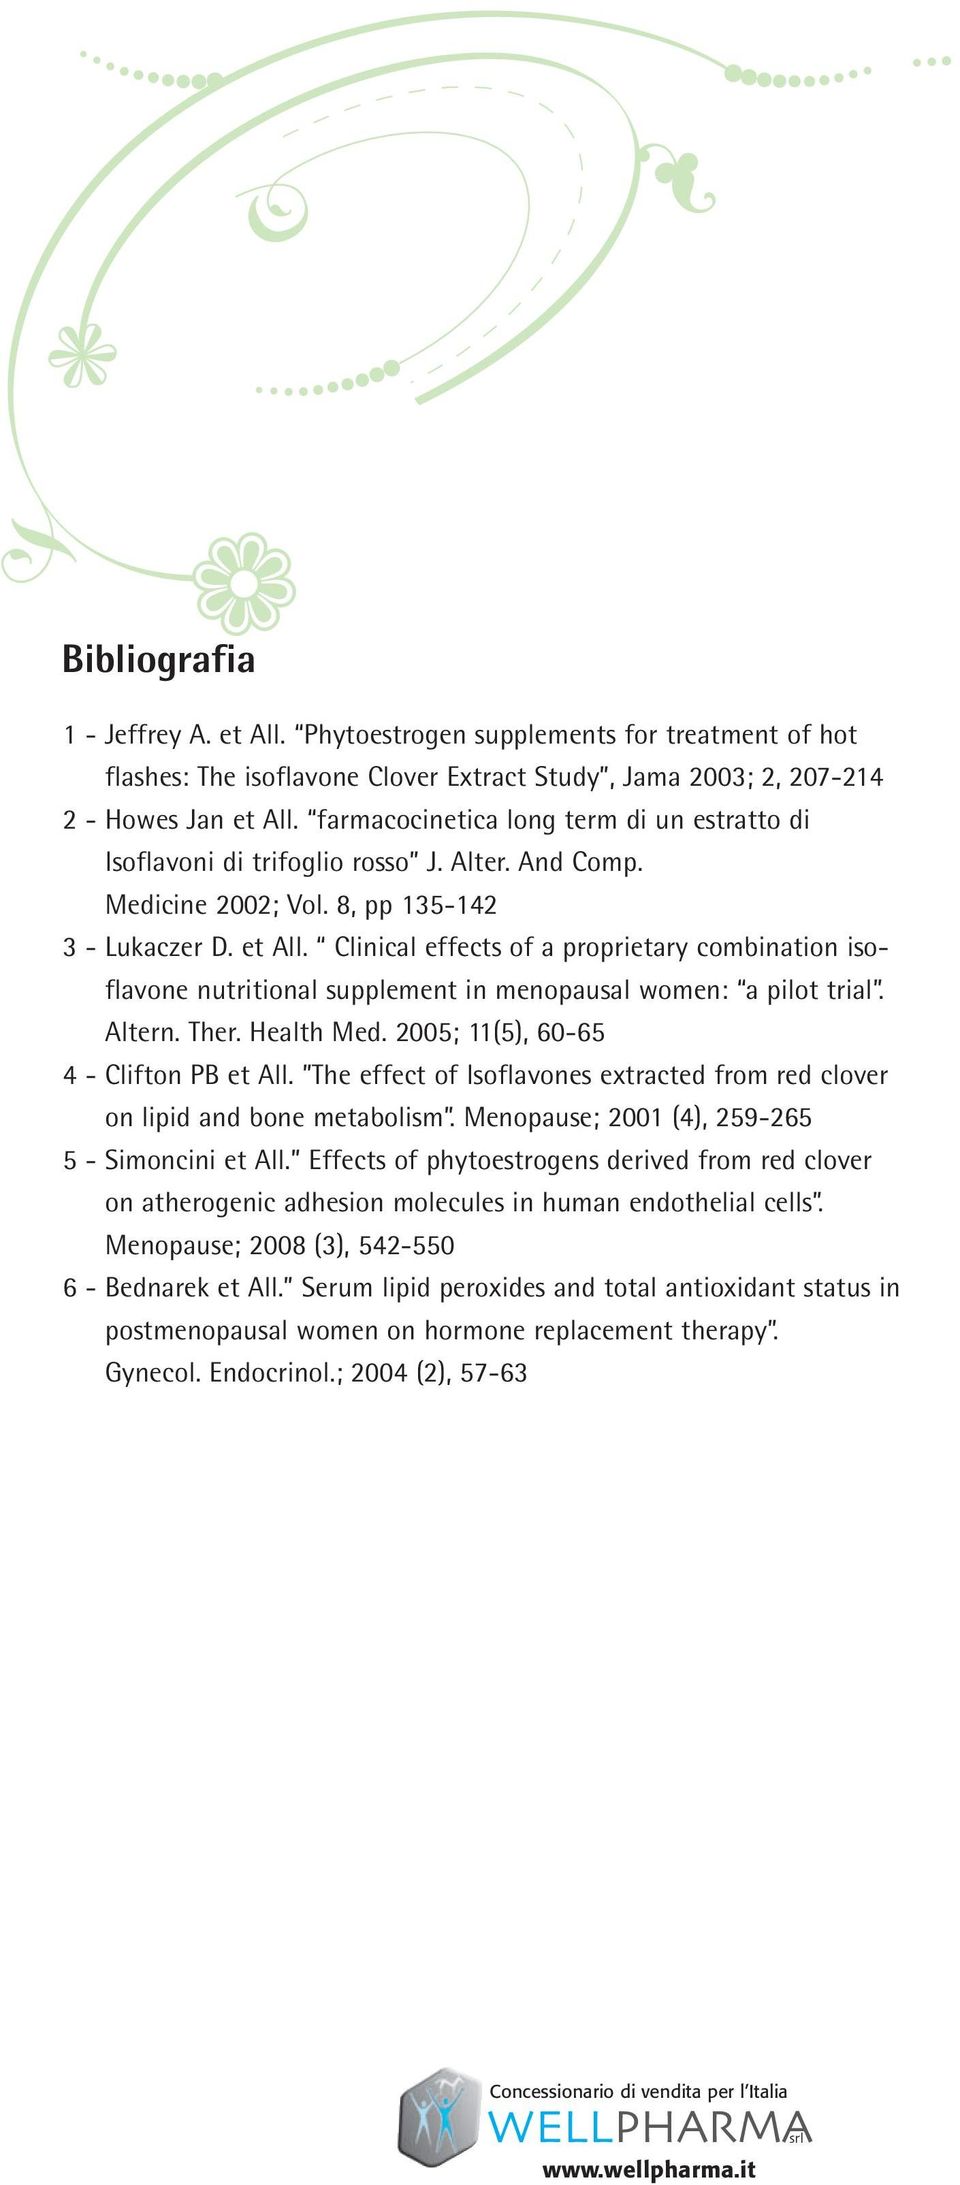 Clinical effects of a proprietary combination isoflavone nutritional supplement in menopausal women: a pilot trial. Altern. Ther. Health Med. 2005; 11(5), 60-65 4 - Clifton PB et All.